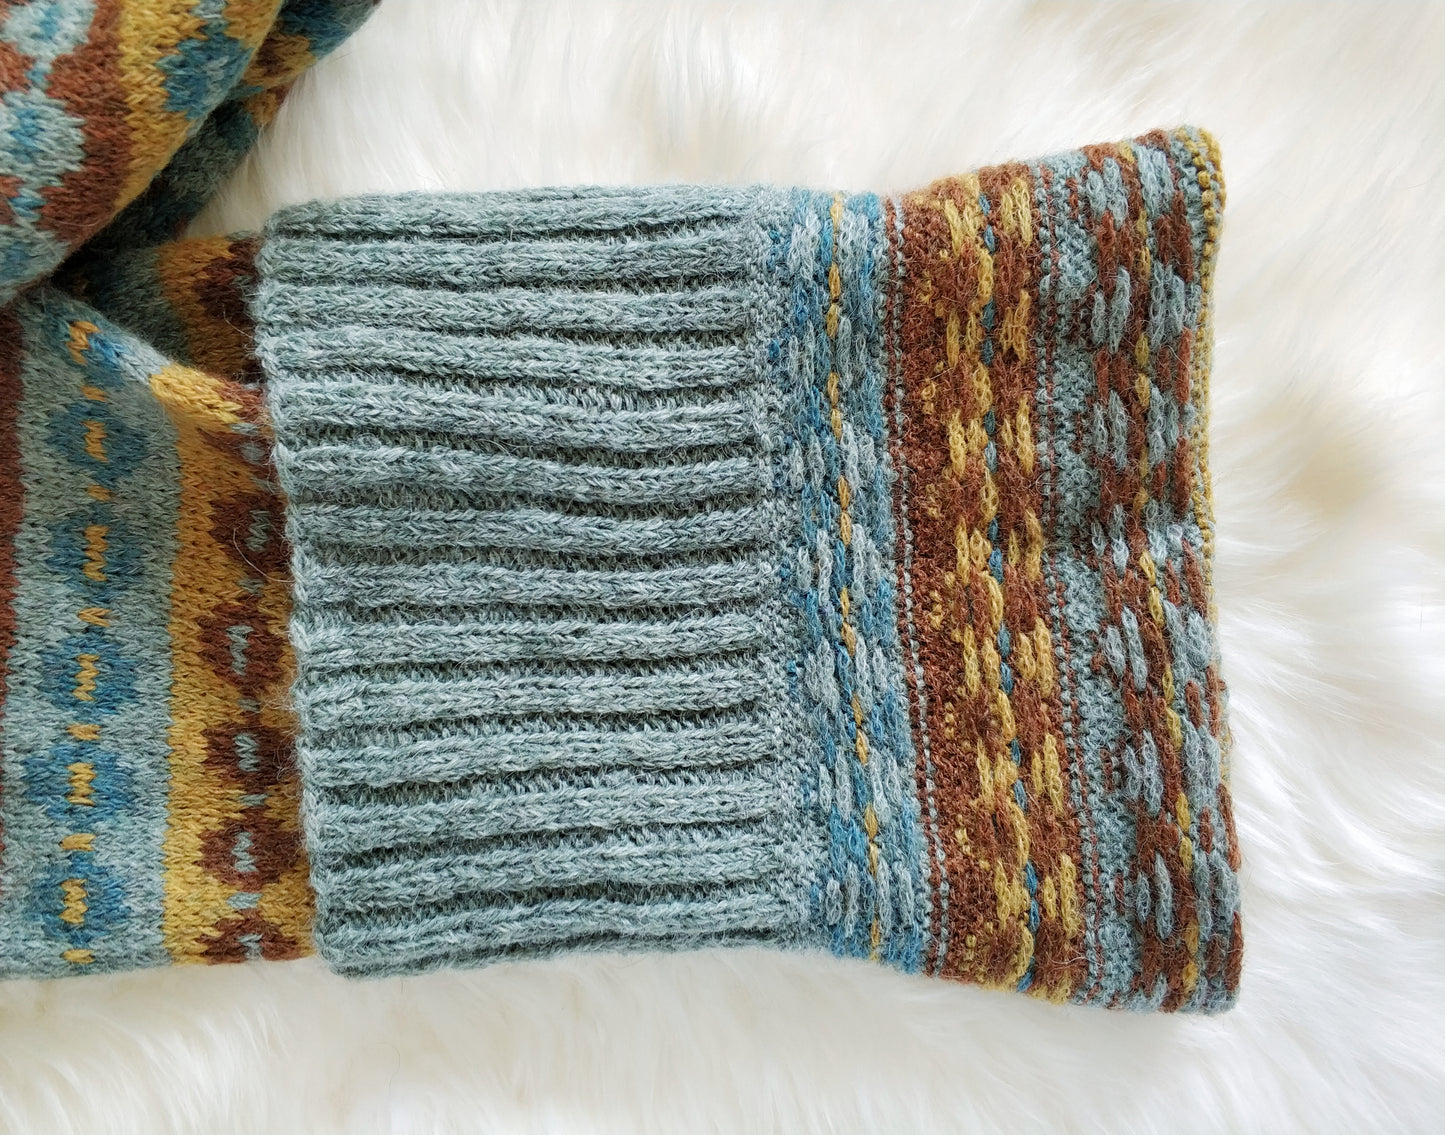 Grey, brown, yellow and blue alpaca wool hand-knitted Fair Isle long double layered scarf, wrong side